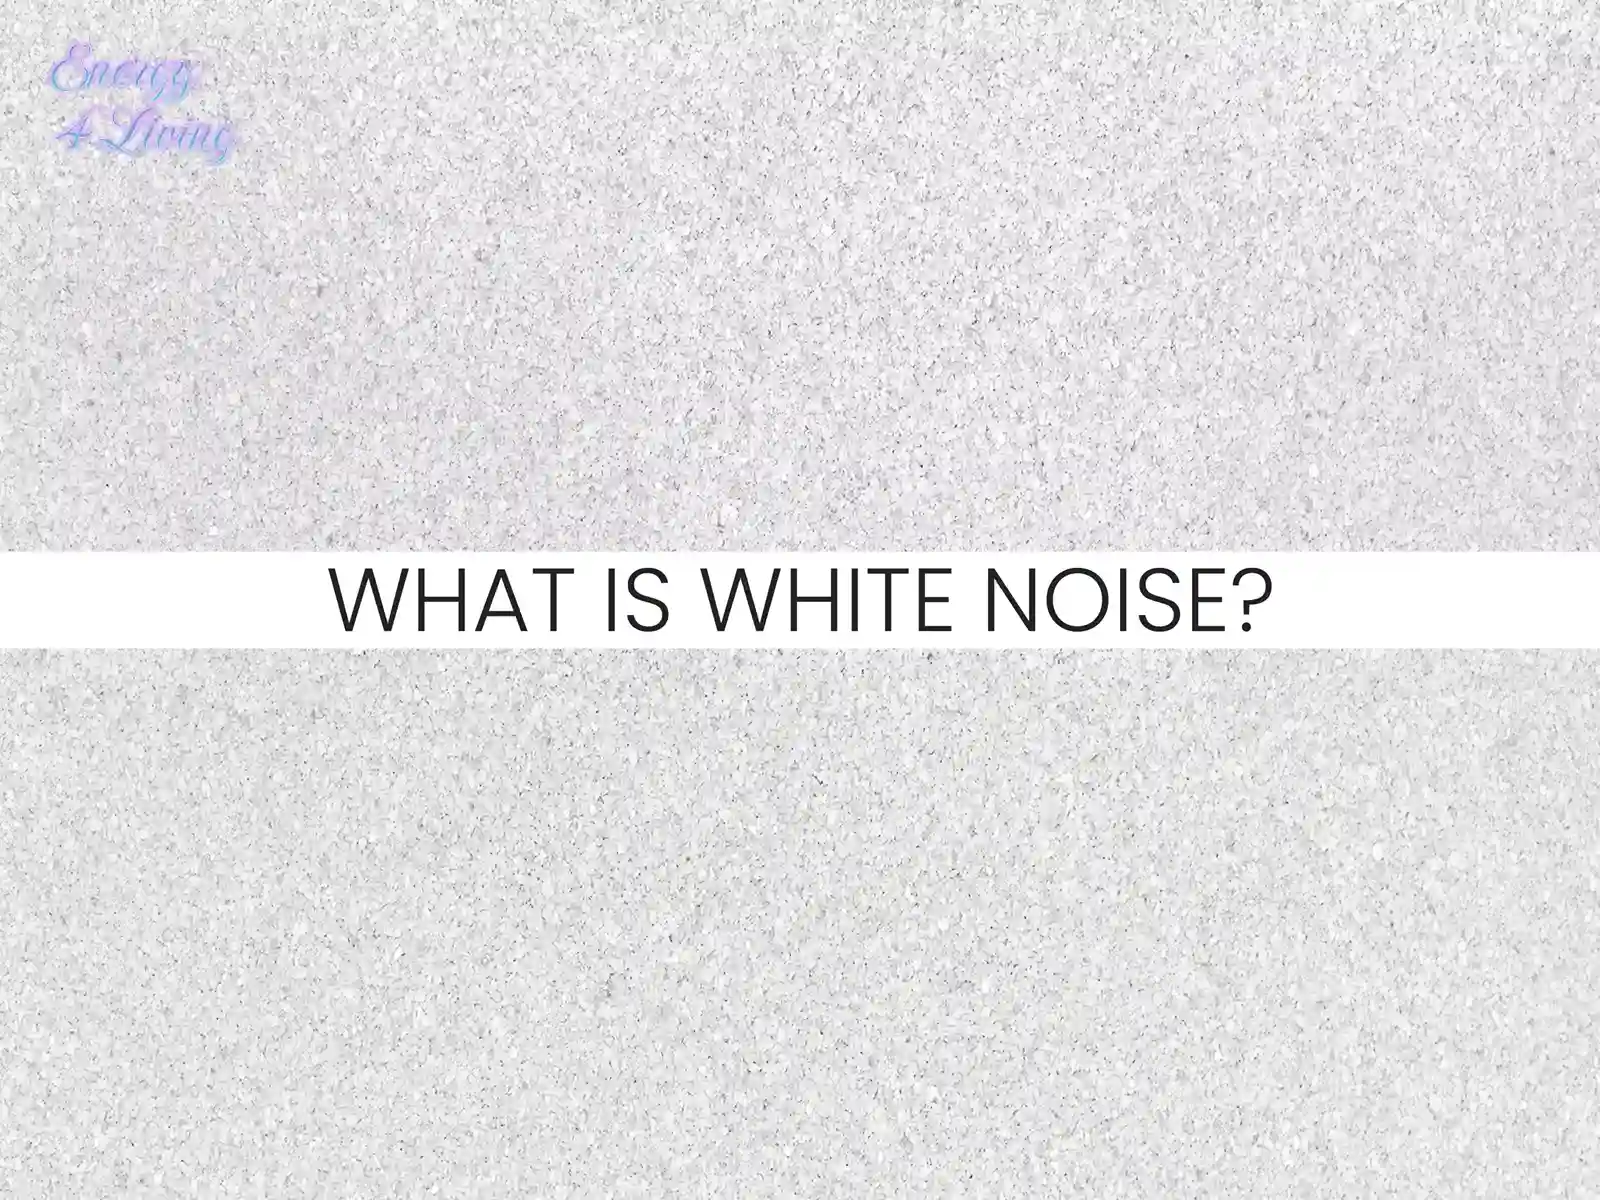 What is white noise